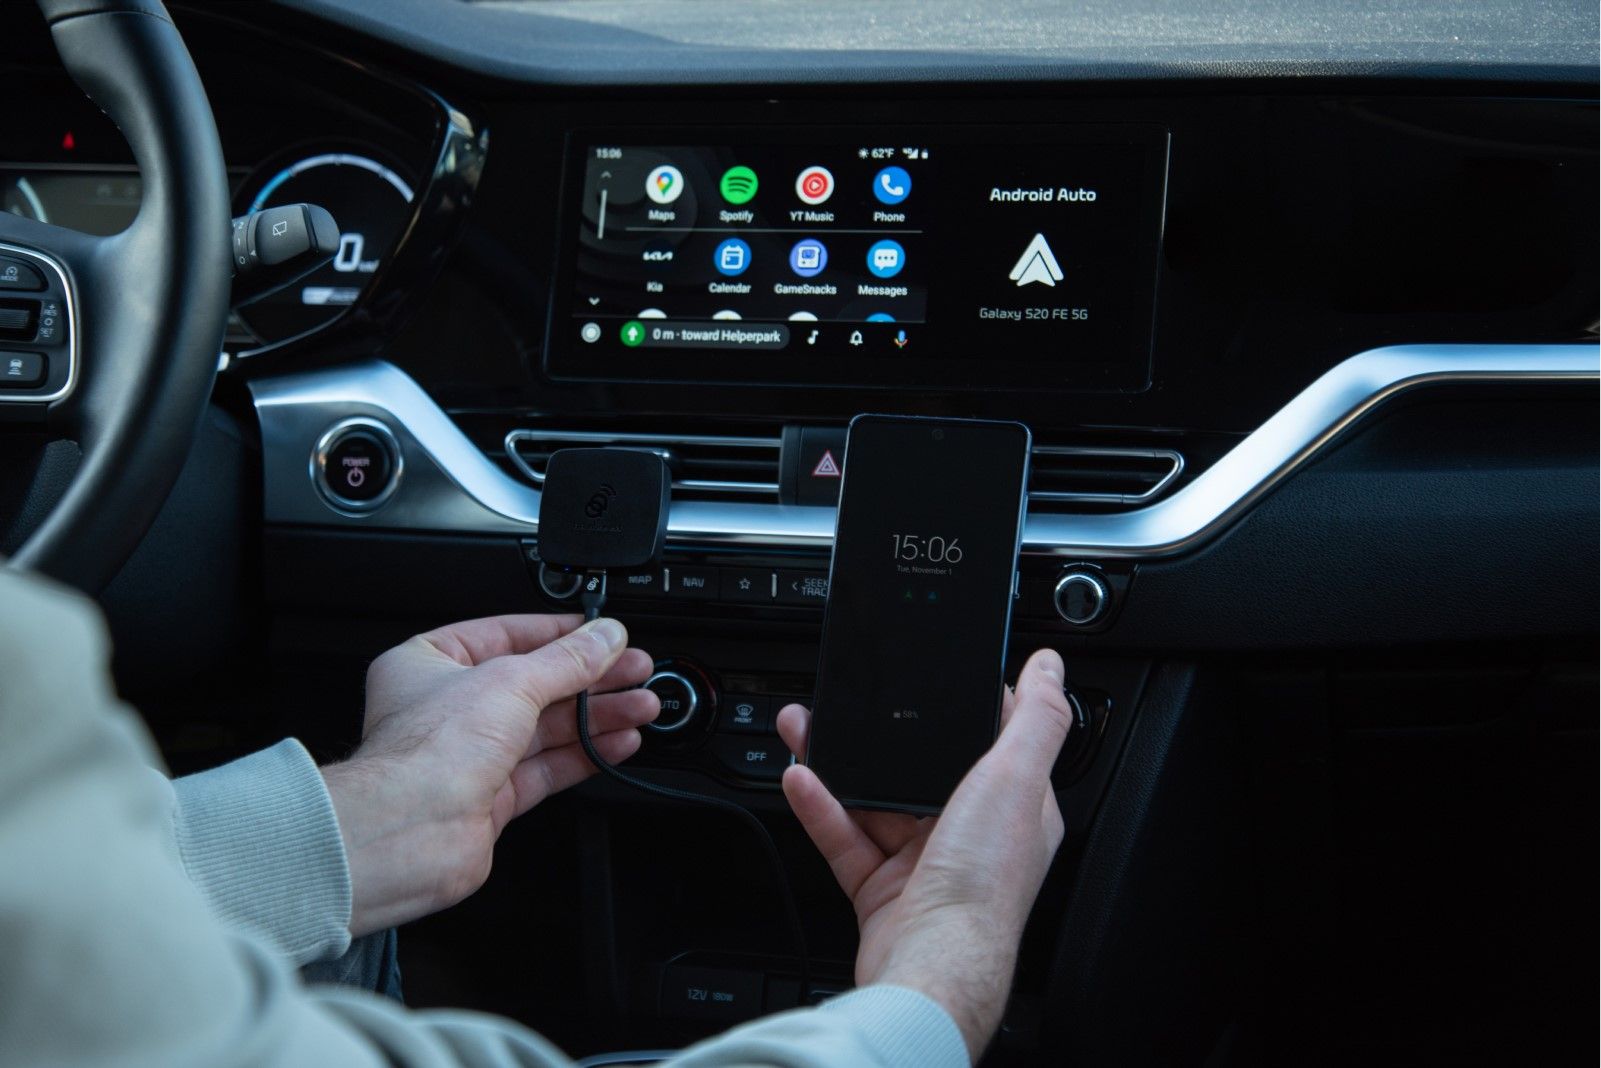 How to use an Android Auto wireless adapter in your car